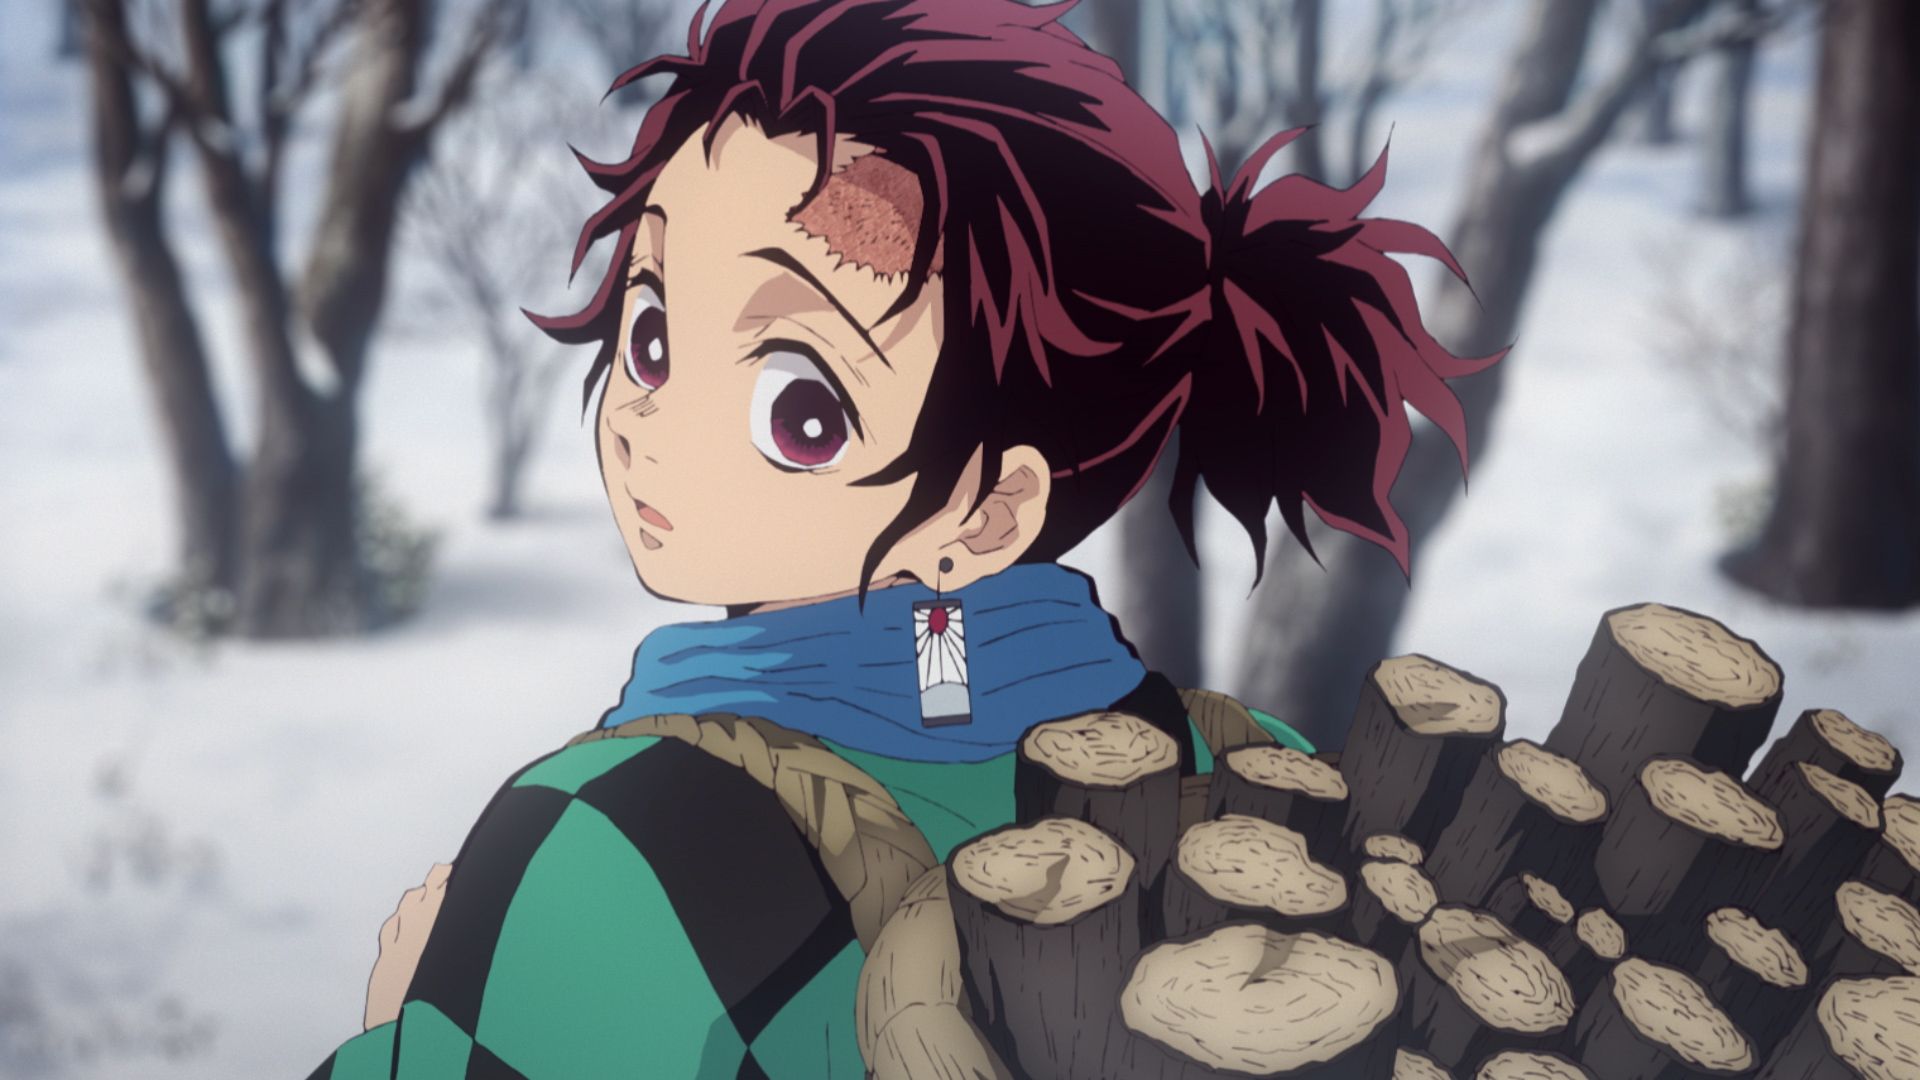 Demon Slayer Season 2 Episode 6 Release Date, Time, Preview Revealed